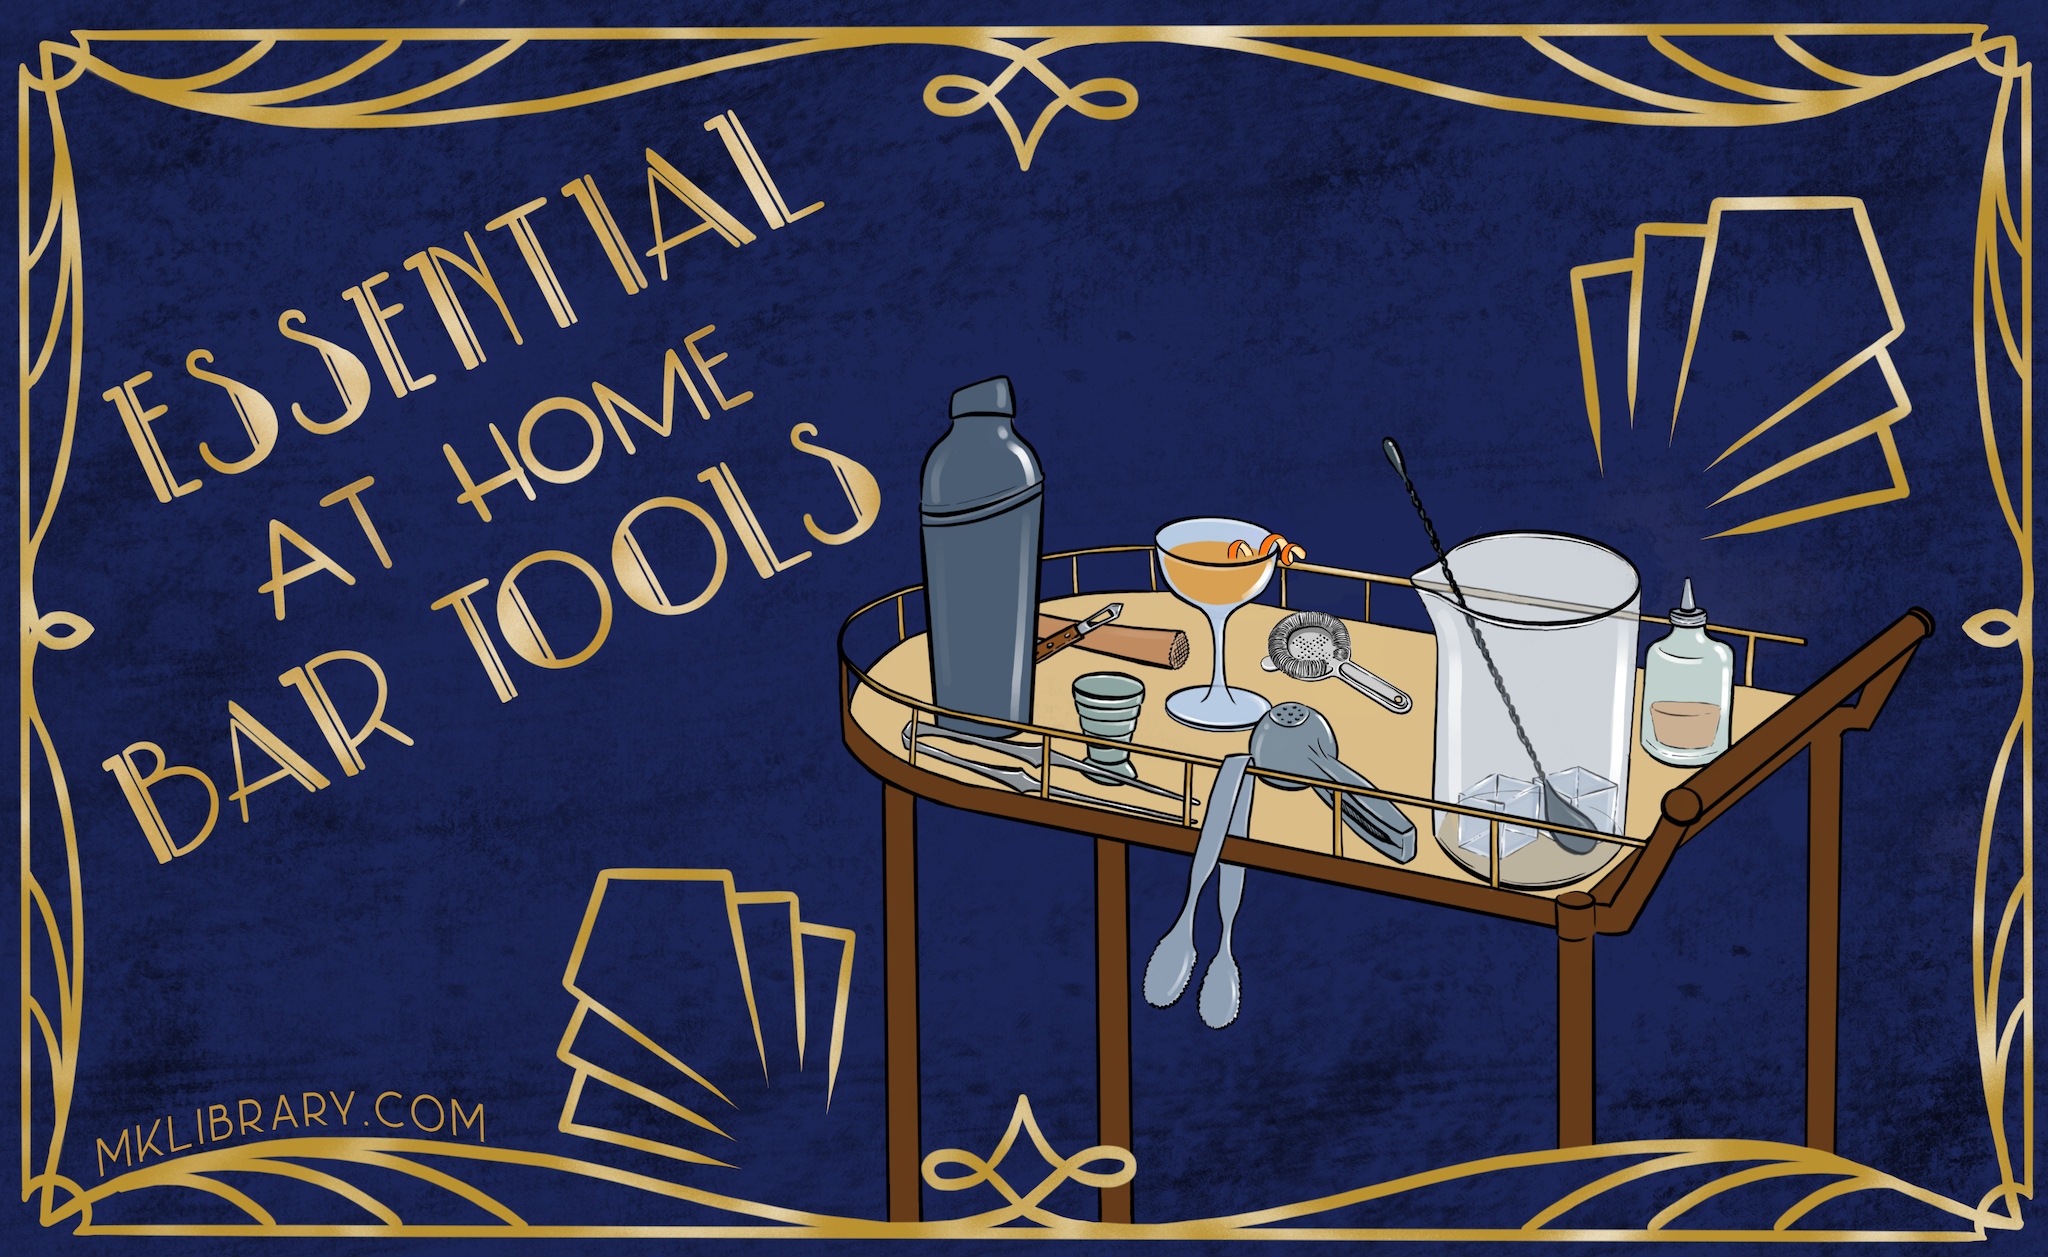 Bar tool set home essentials mk library featured